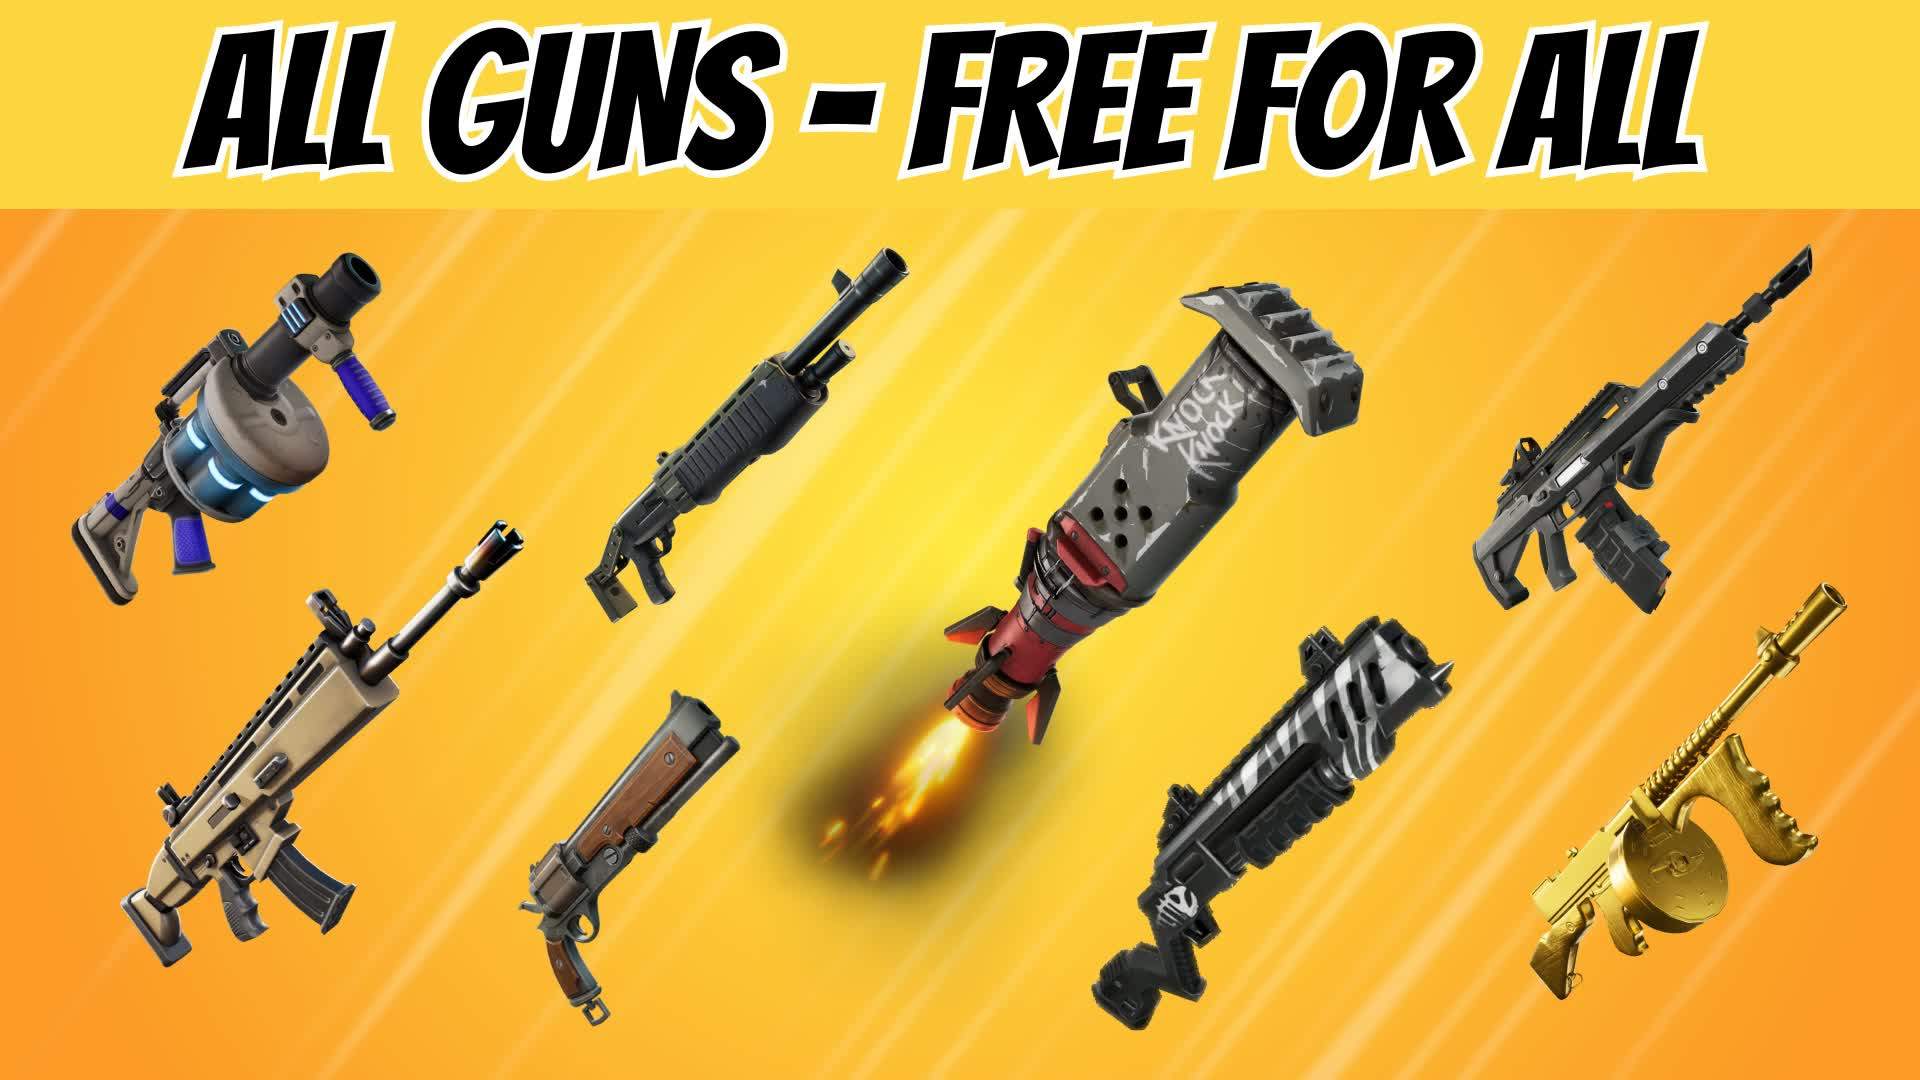 All Guns - Free For All